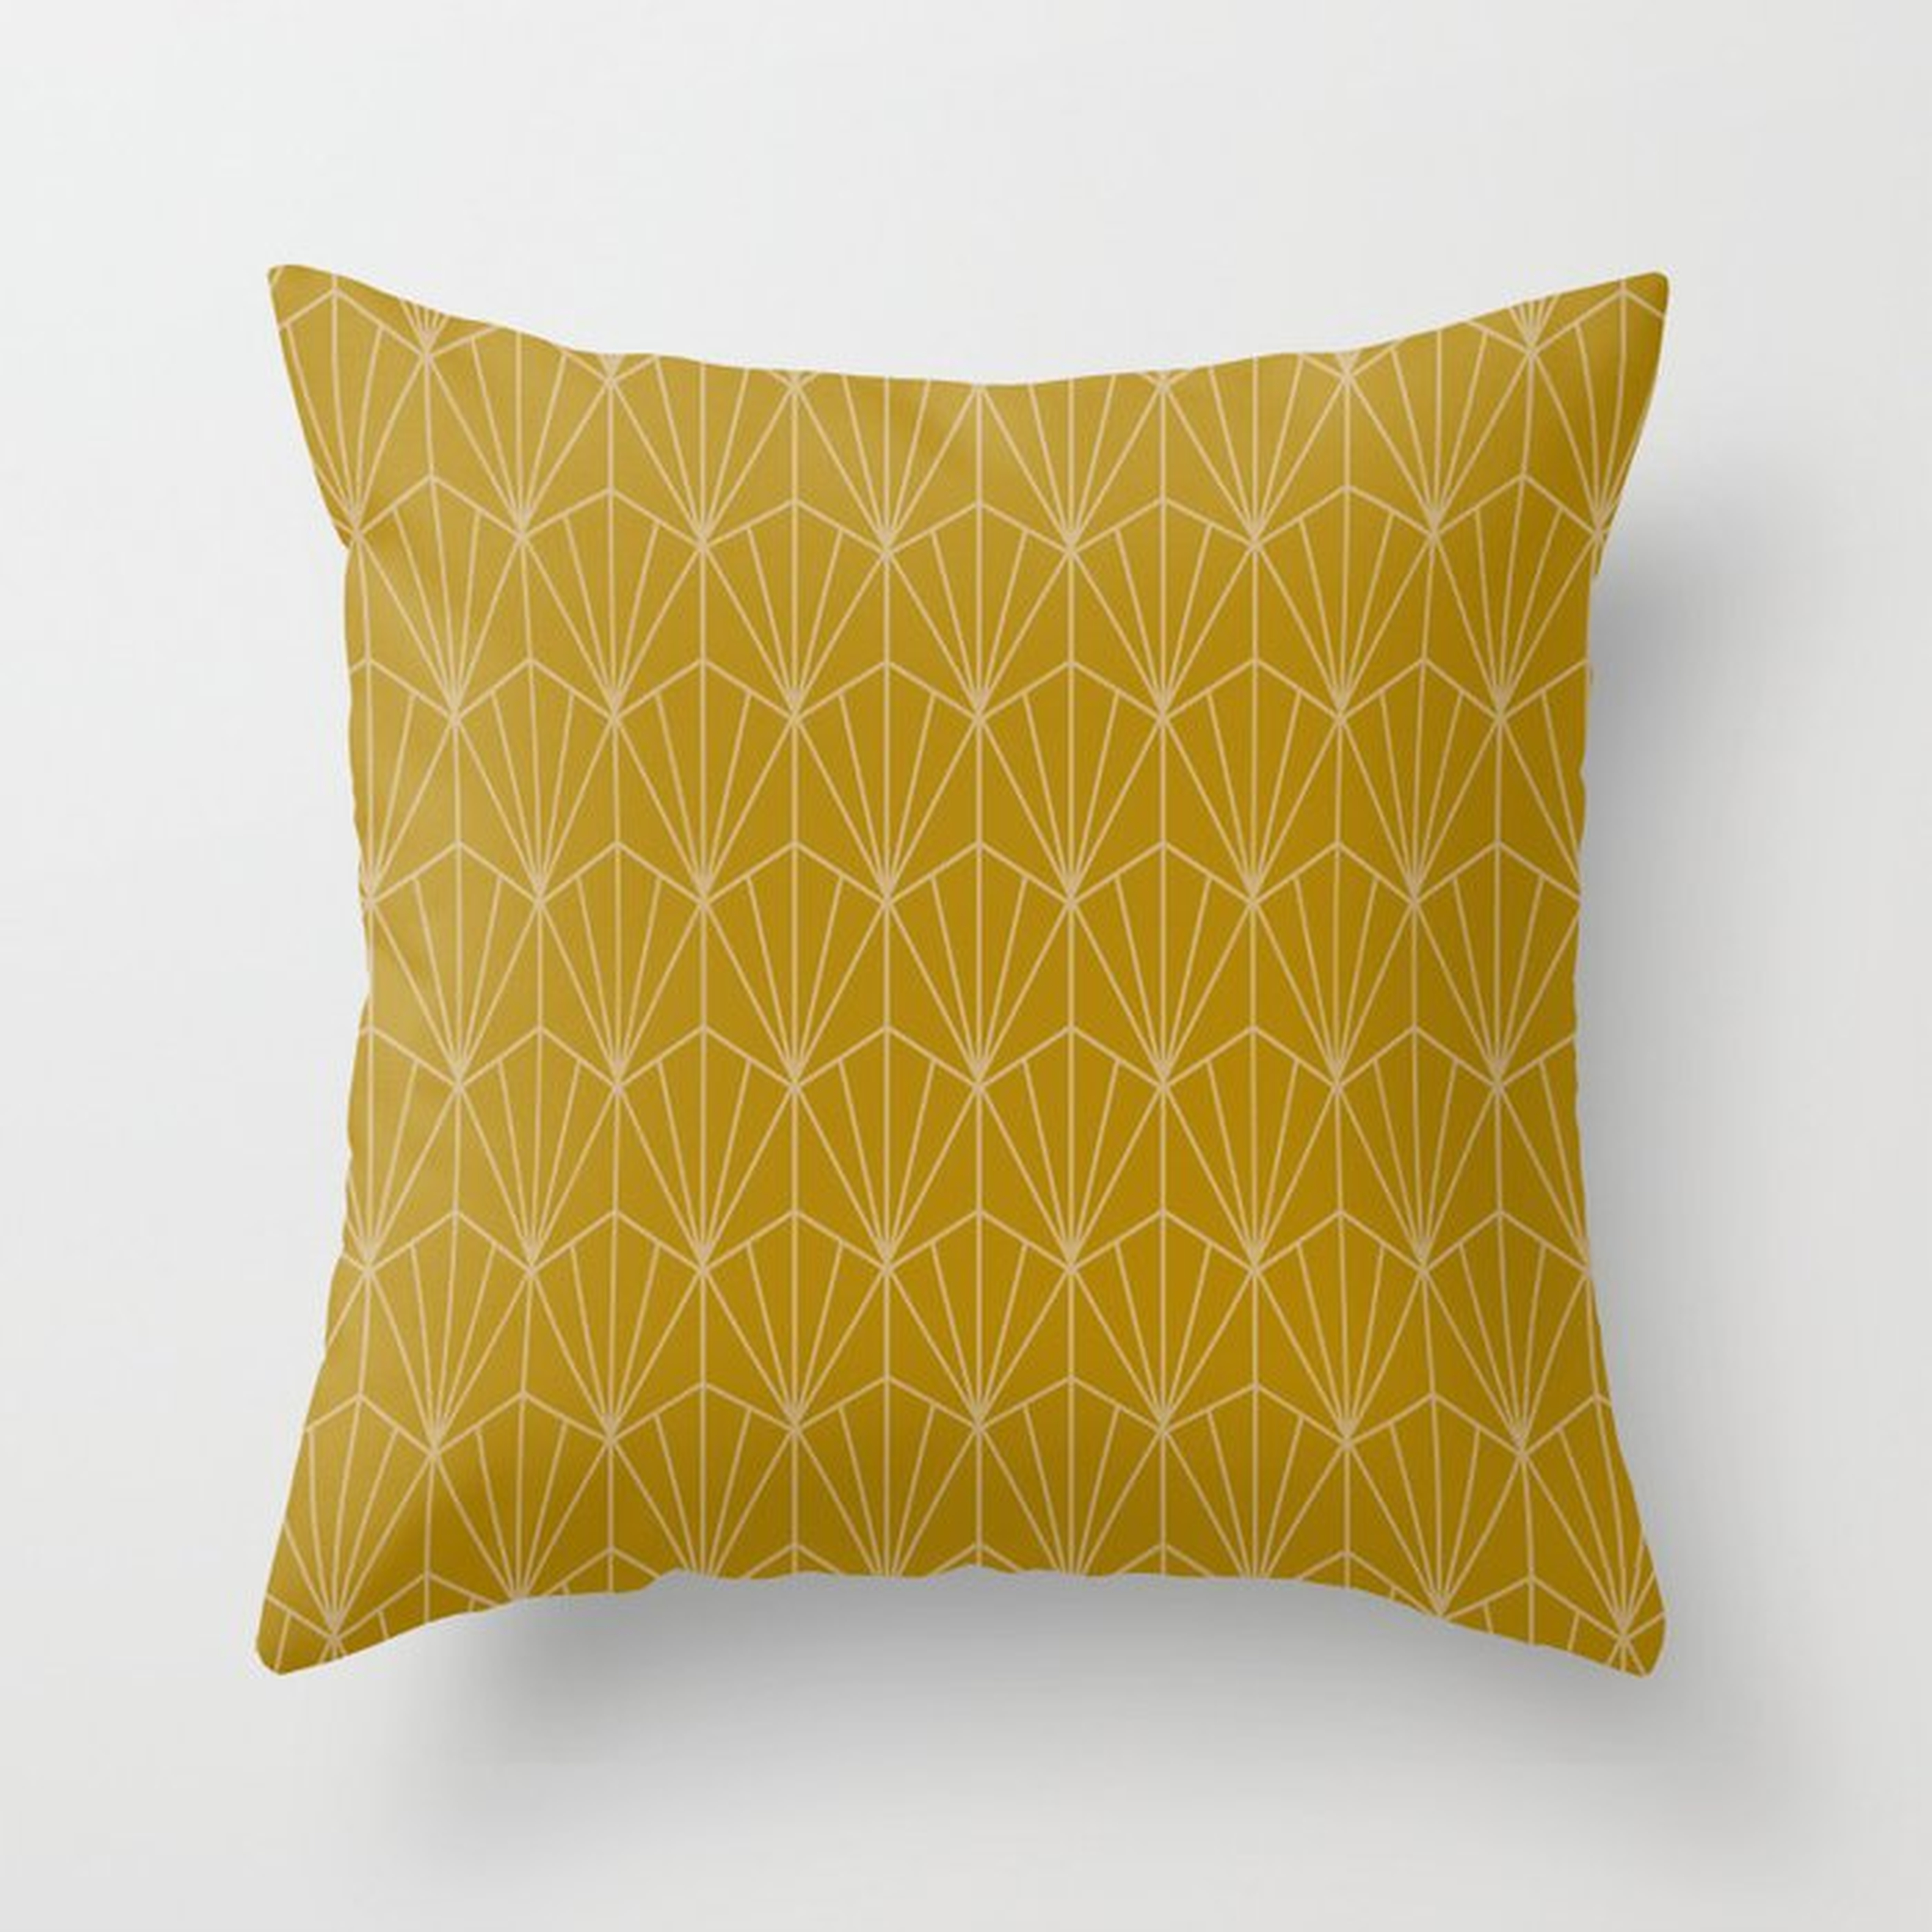 Art Deco Vector In Gold Couch Throw Pillow by Becky Bailey - Cover (20" x 20") with pillow insert - Outdoor Pillow - Society6